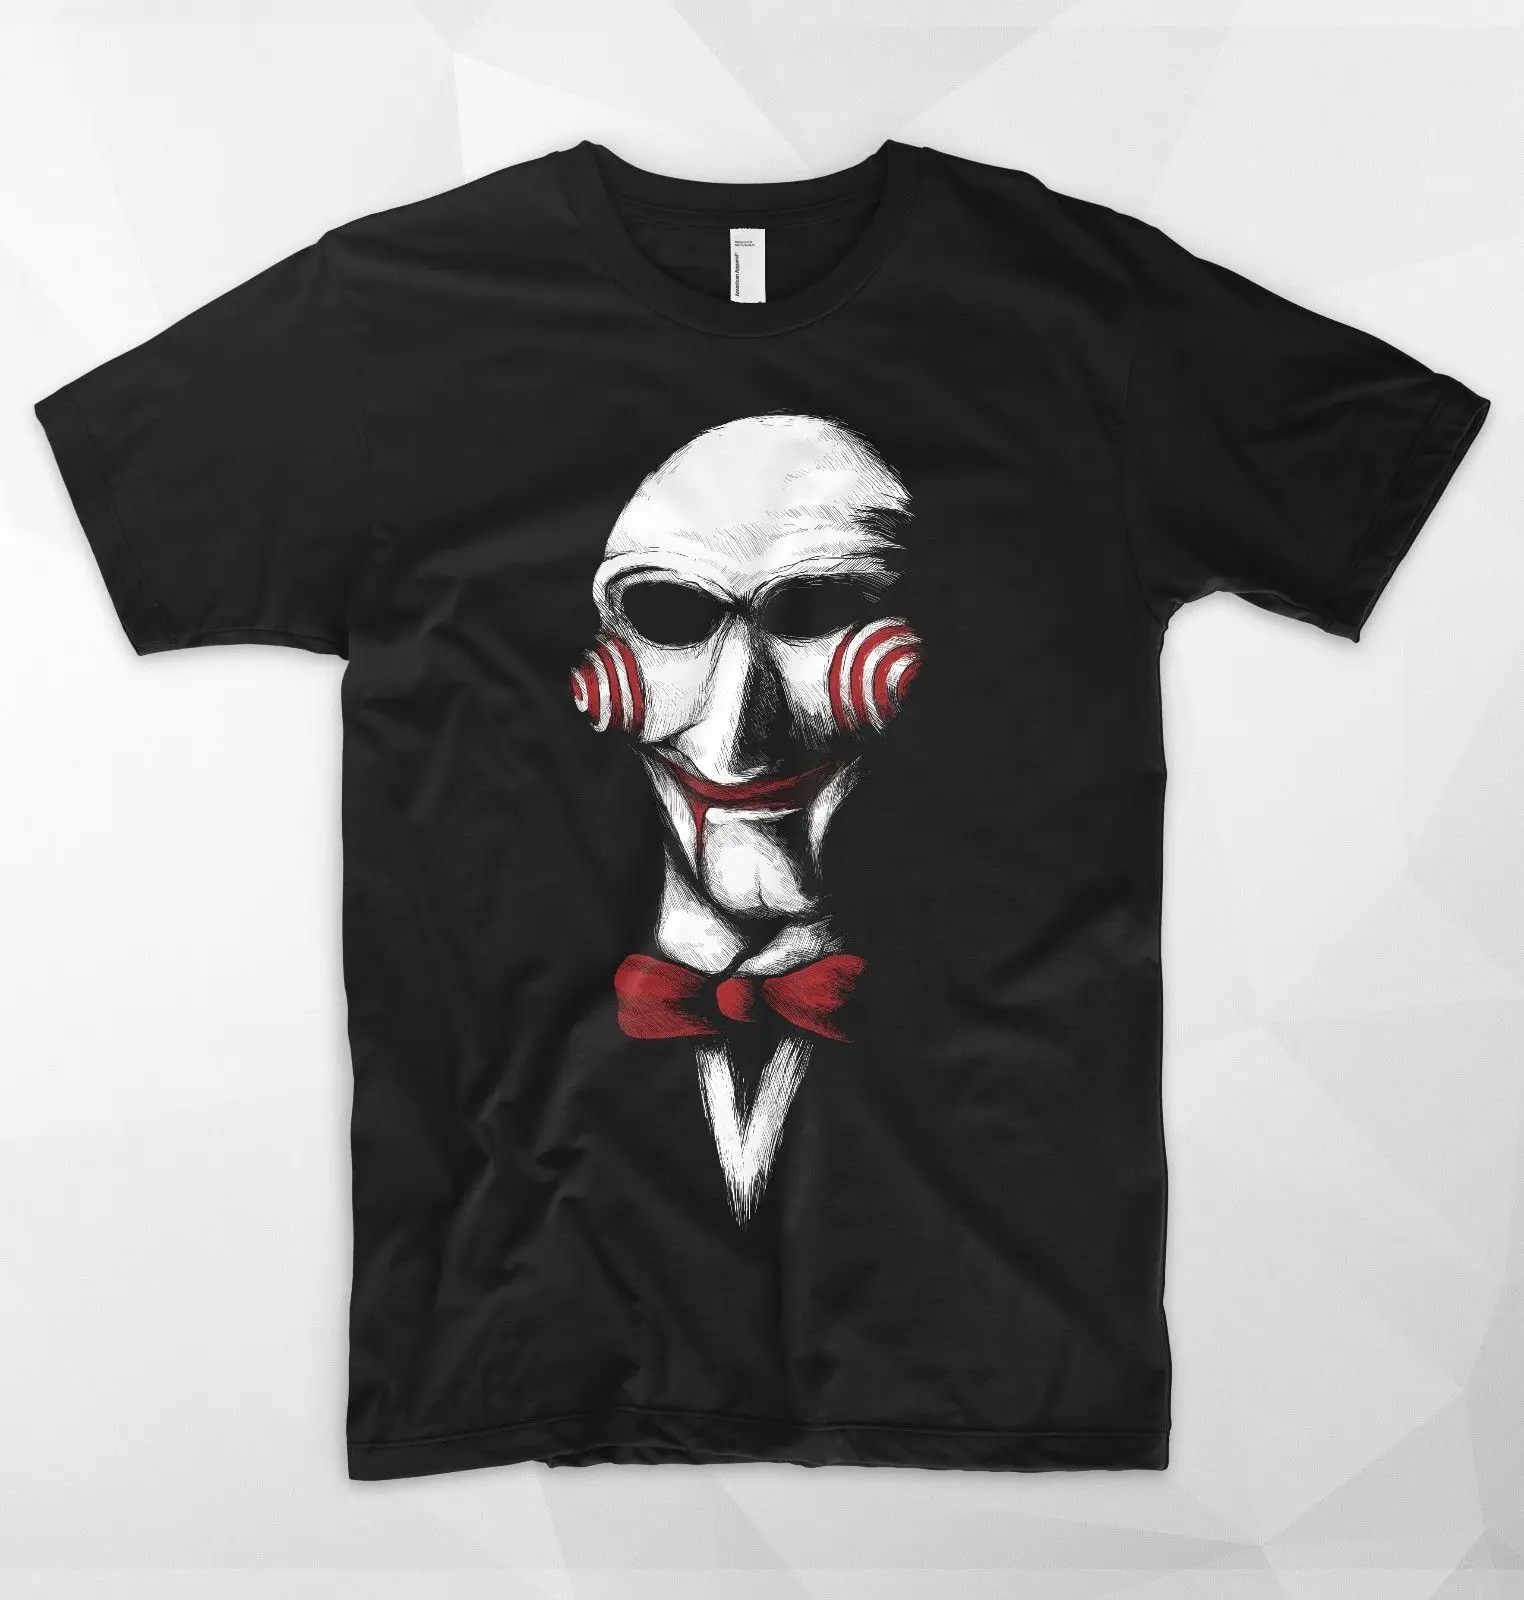 

Let's Play A Game. Saw Horror Movie Scary Killer Jigsaw T Shirt. Short Sleeve 100% Cotton Casual T-shirts Loose Top Size S-3XL